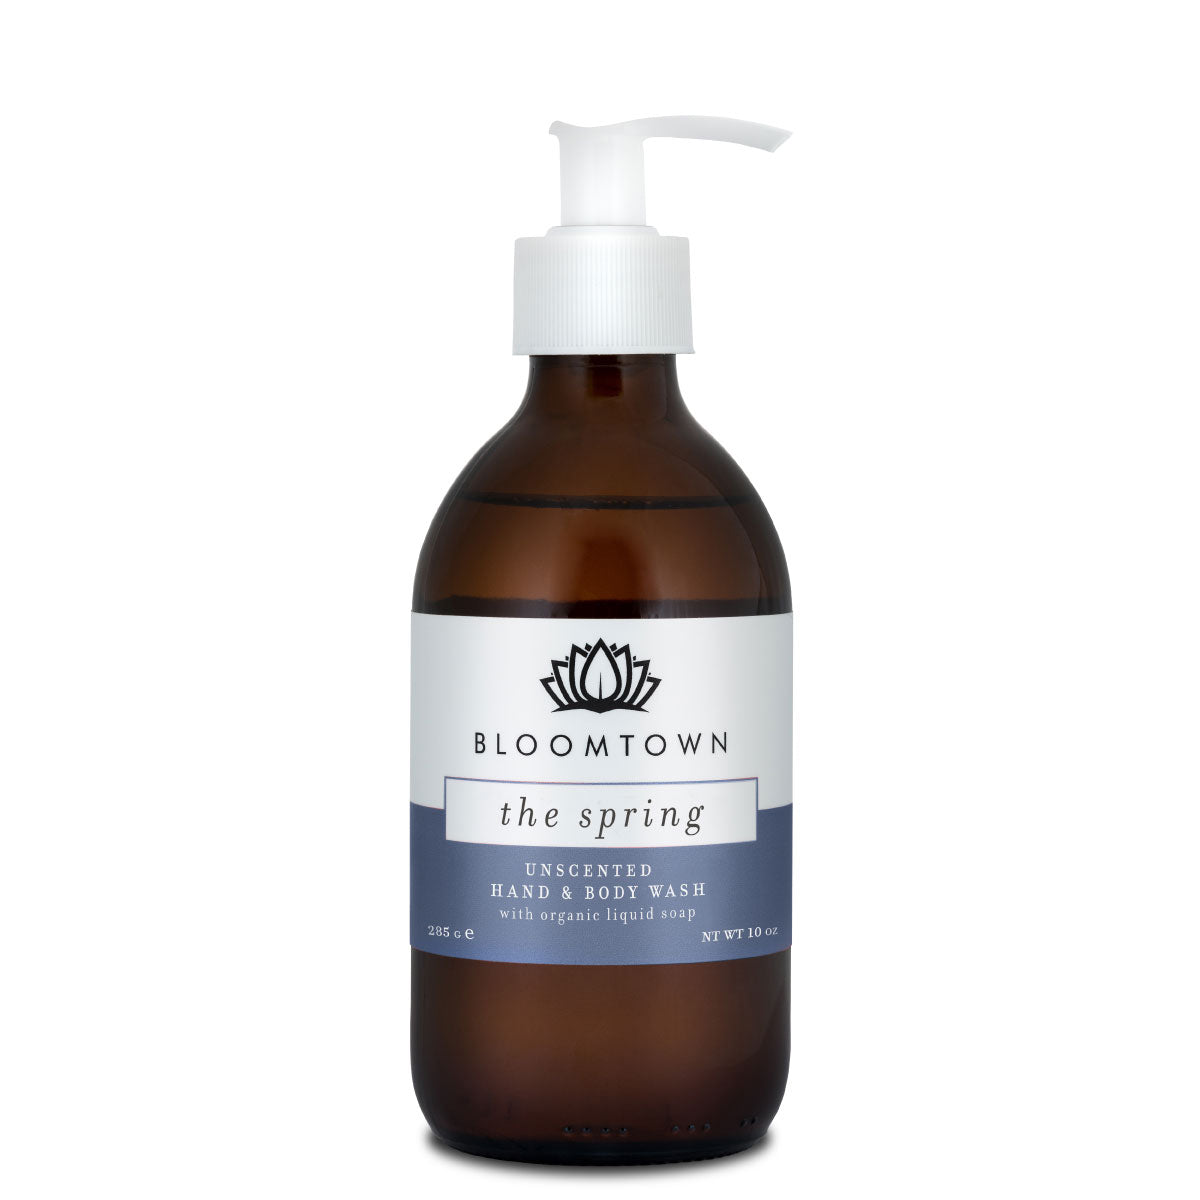 Bloomtown Organic Hand & Body Wash The Spring | Vegan Cosmetics | Sustainable Beauty | Cruelty Free | Natural Ingredients | Sensitive Skincare